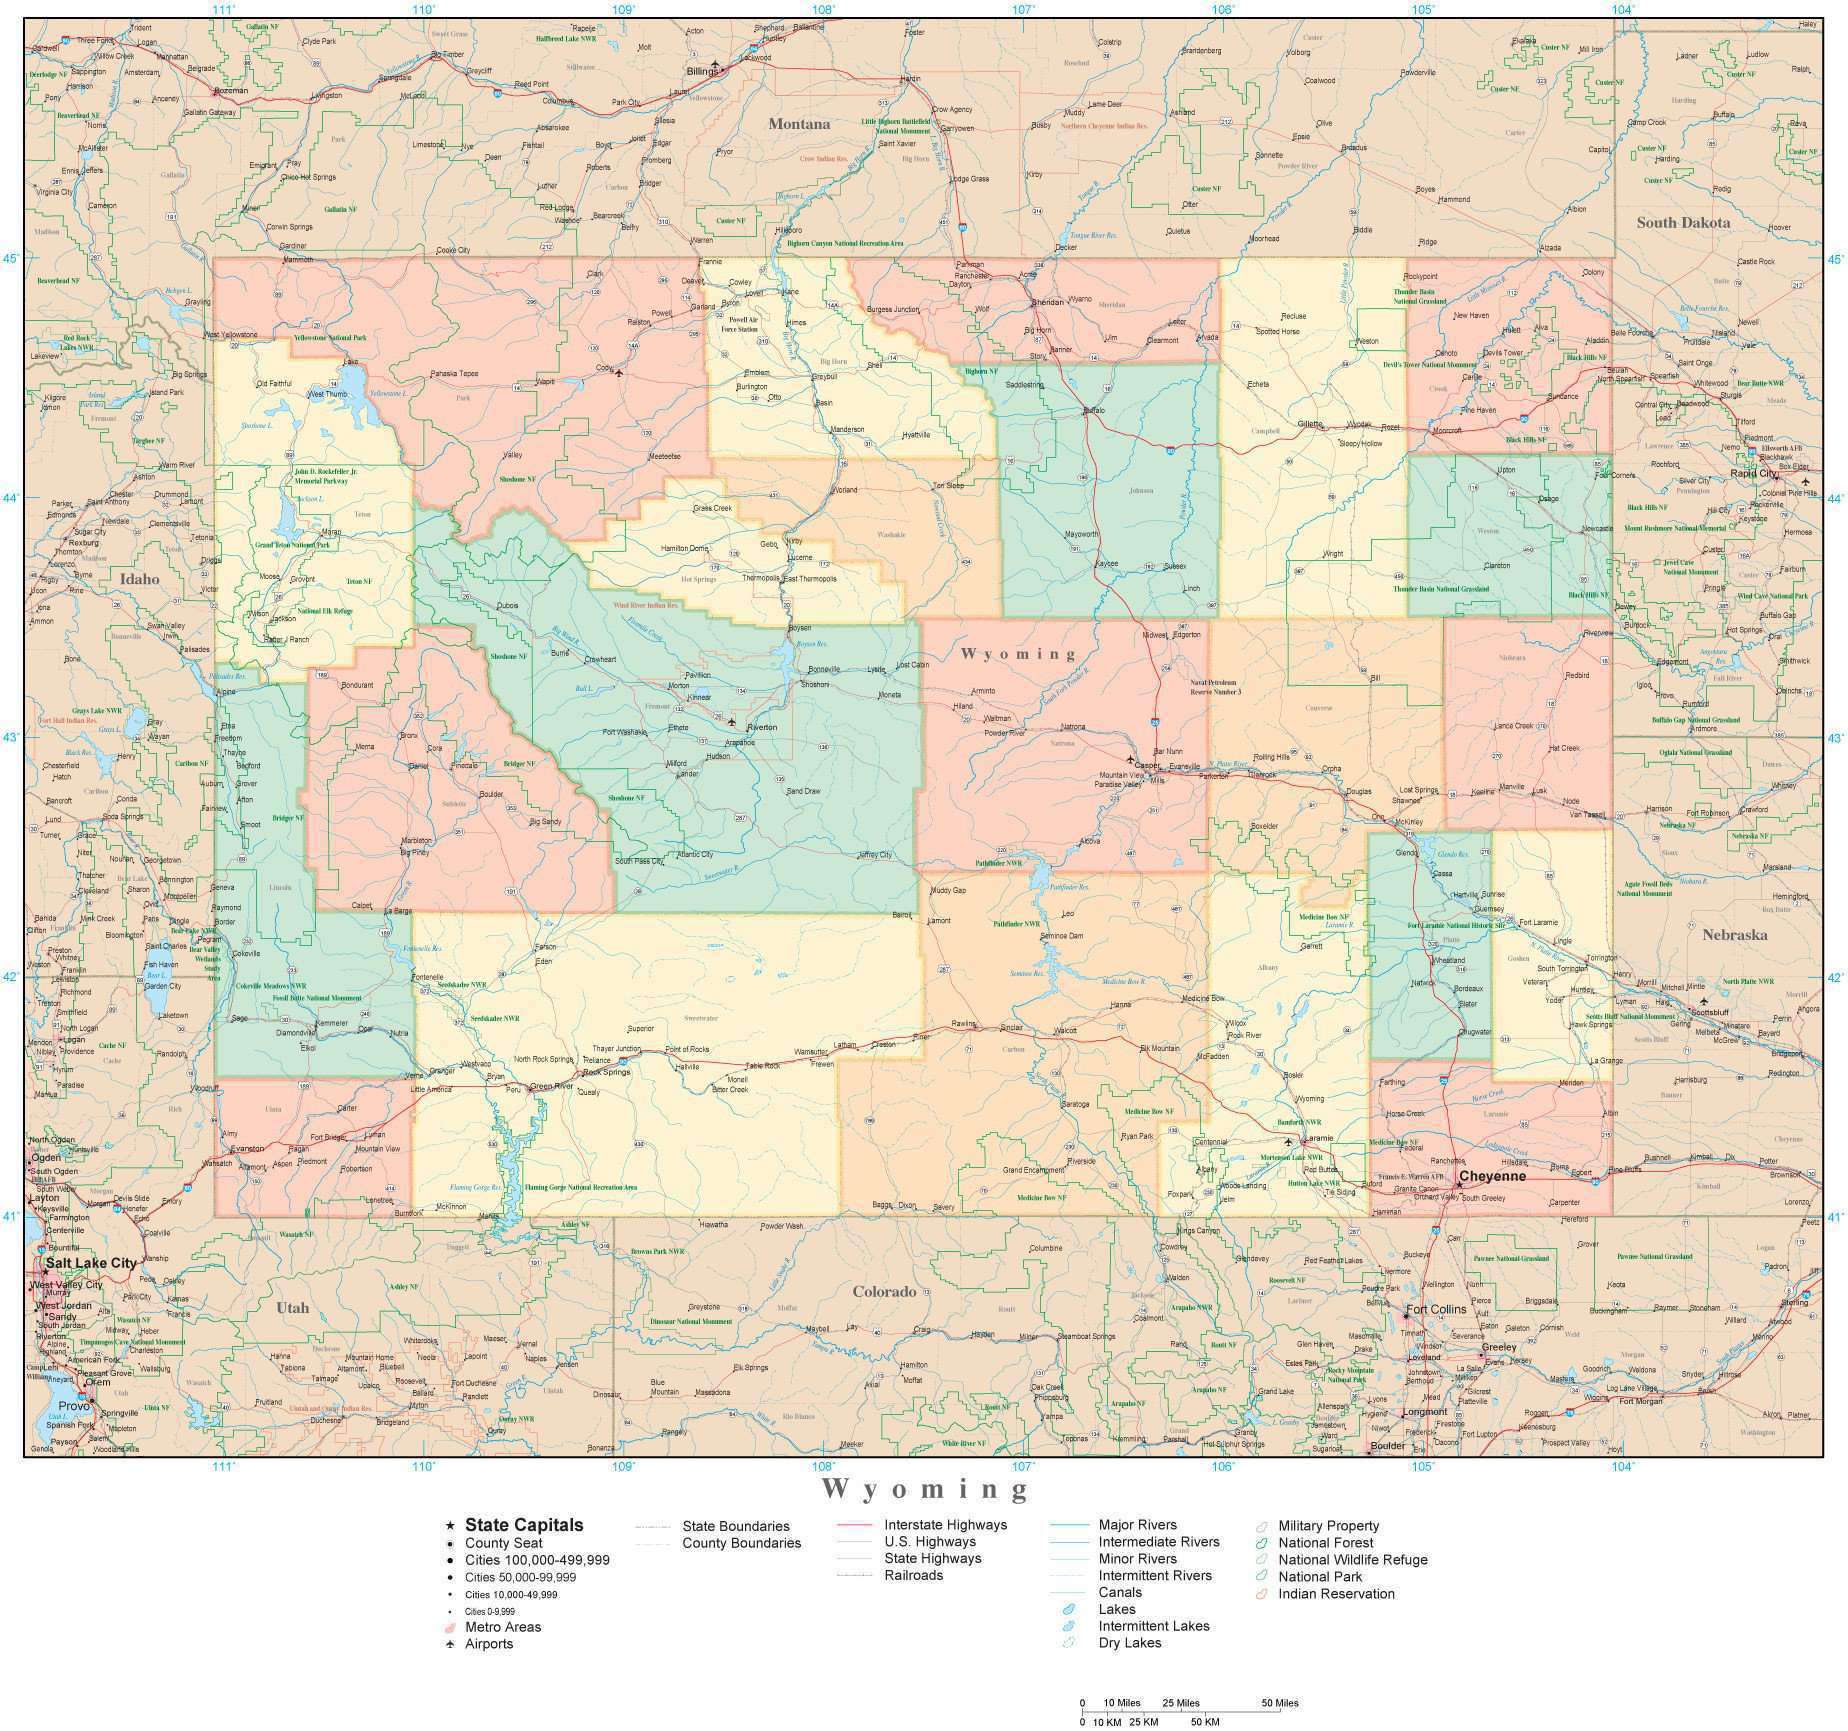 Wyoming State Map In Adobe Illustrator Vector Format Detailed Editable Map From Map Resources 3511